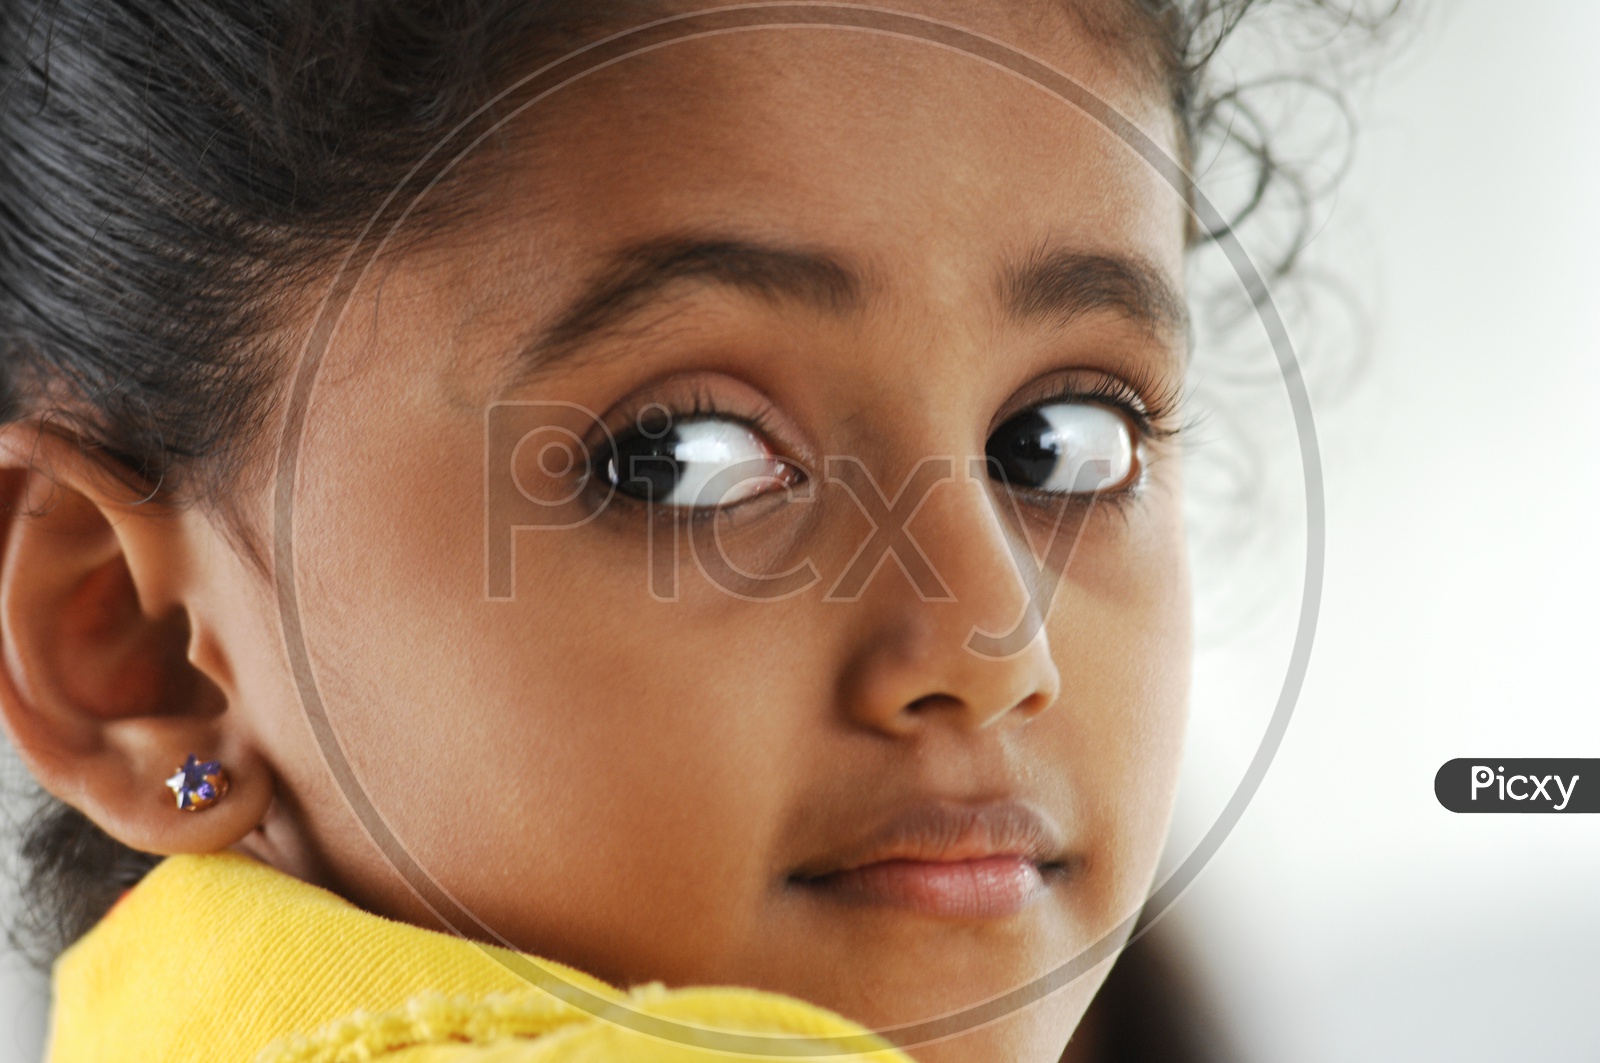 Indian Girl Child With Expression on Face